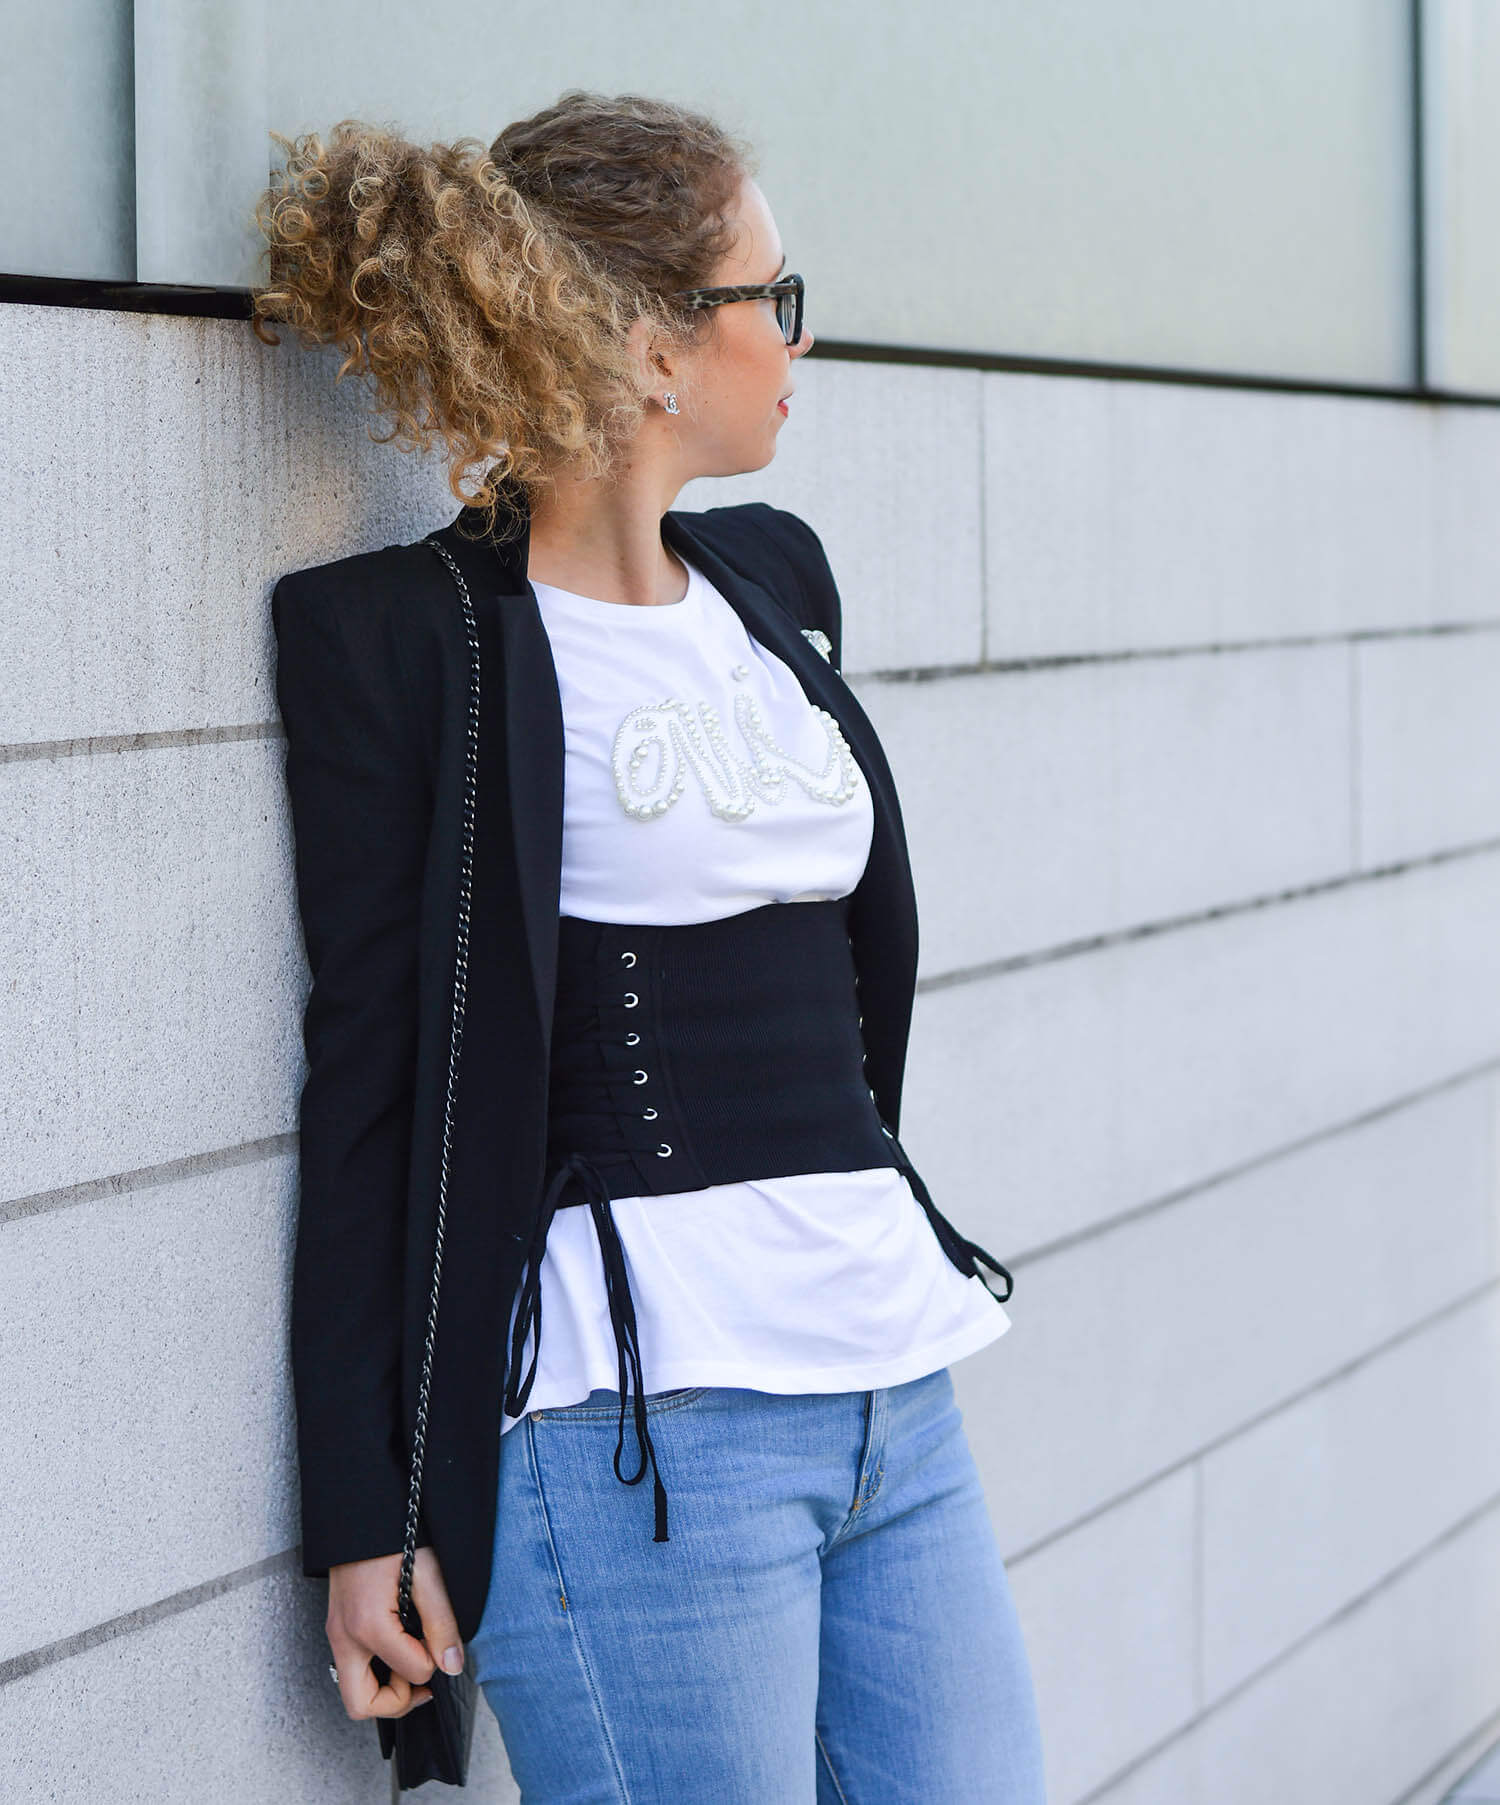 Marionette-fashionblog-nrw-Outfit-Corset-Belt-Pearls-HighHeels-Chanel-streetstyle